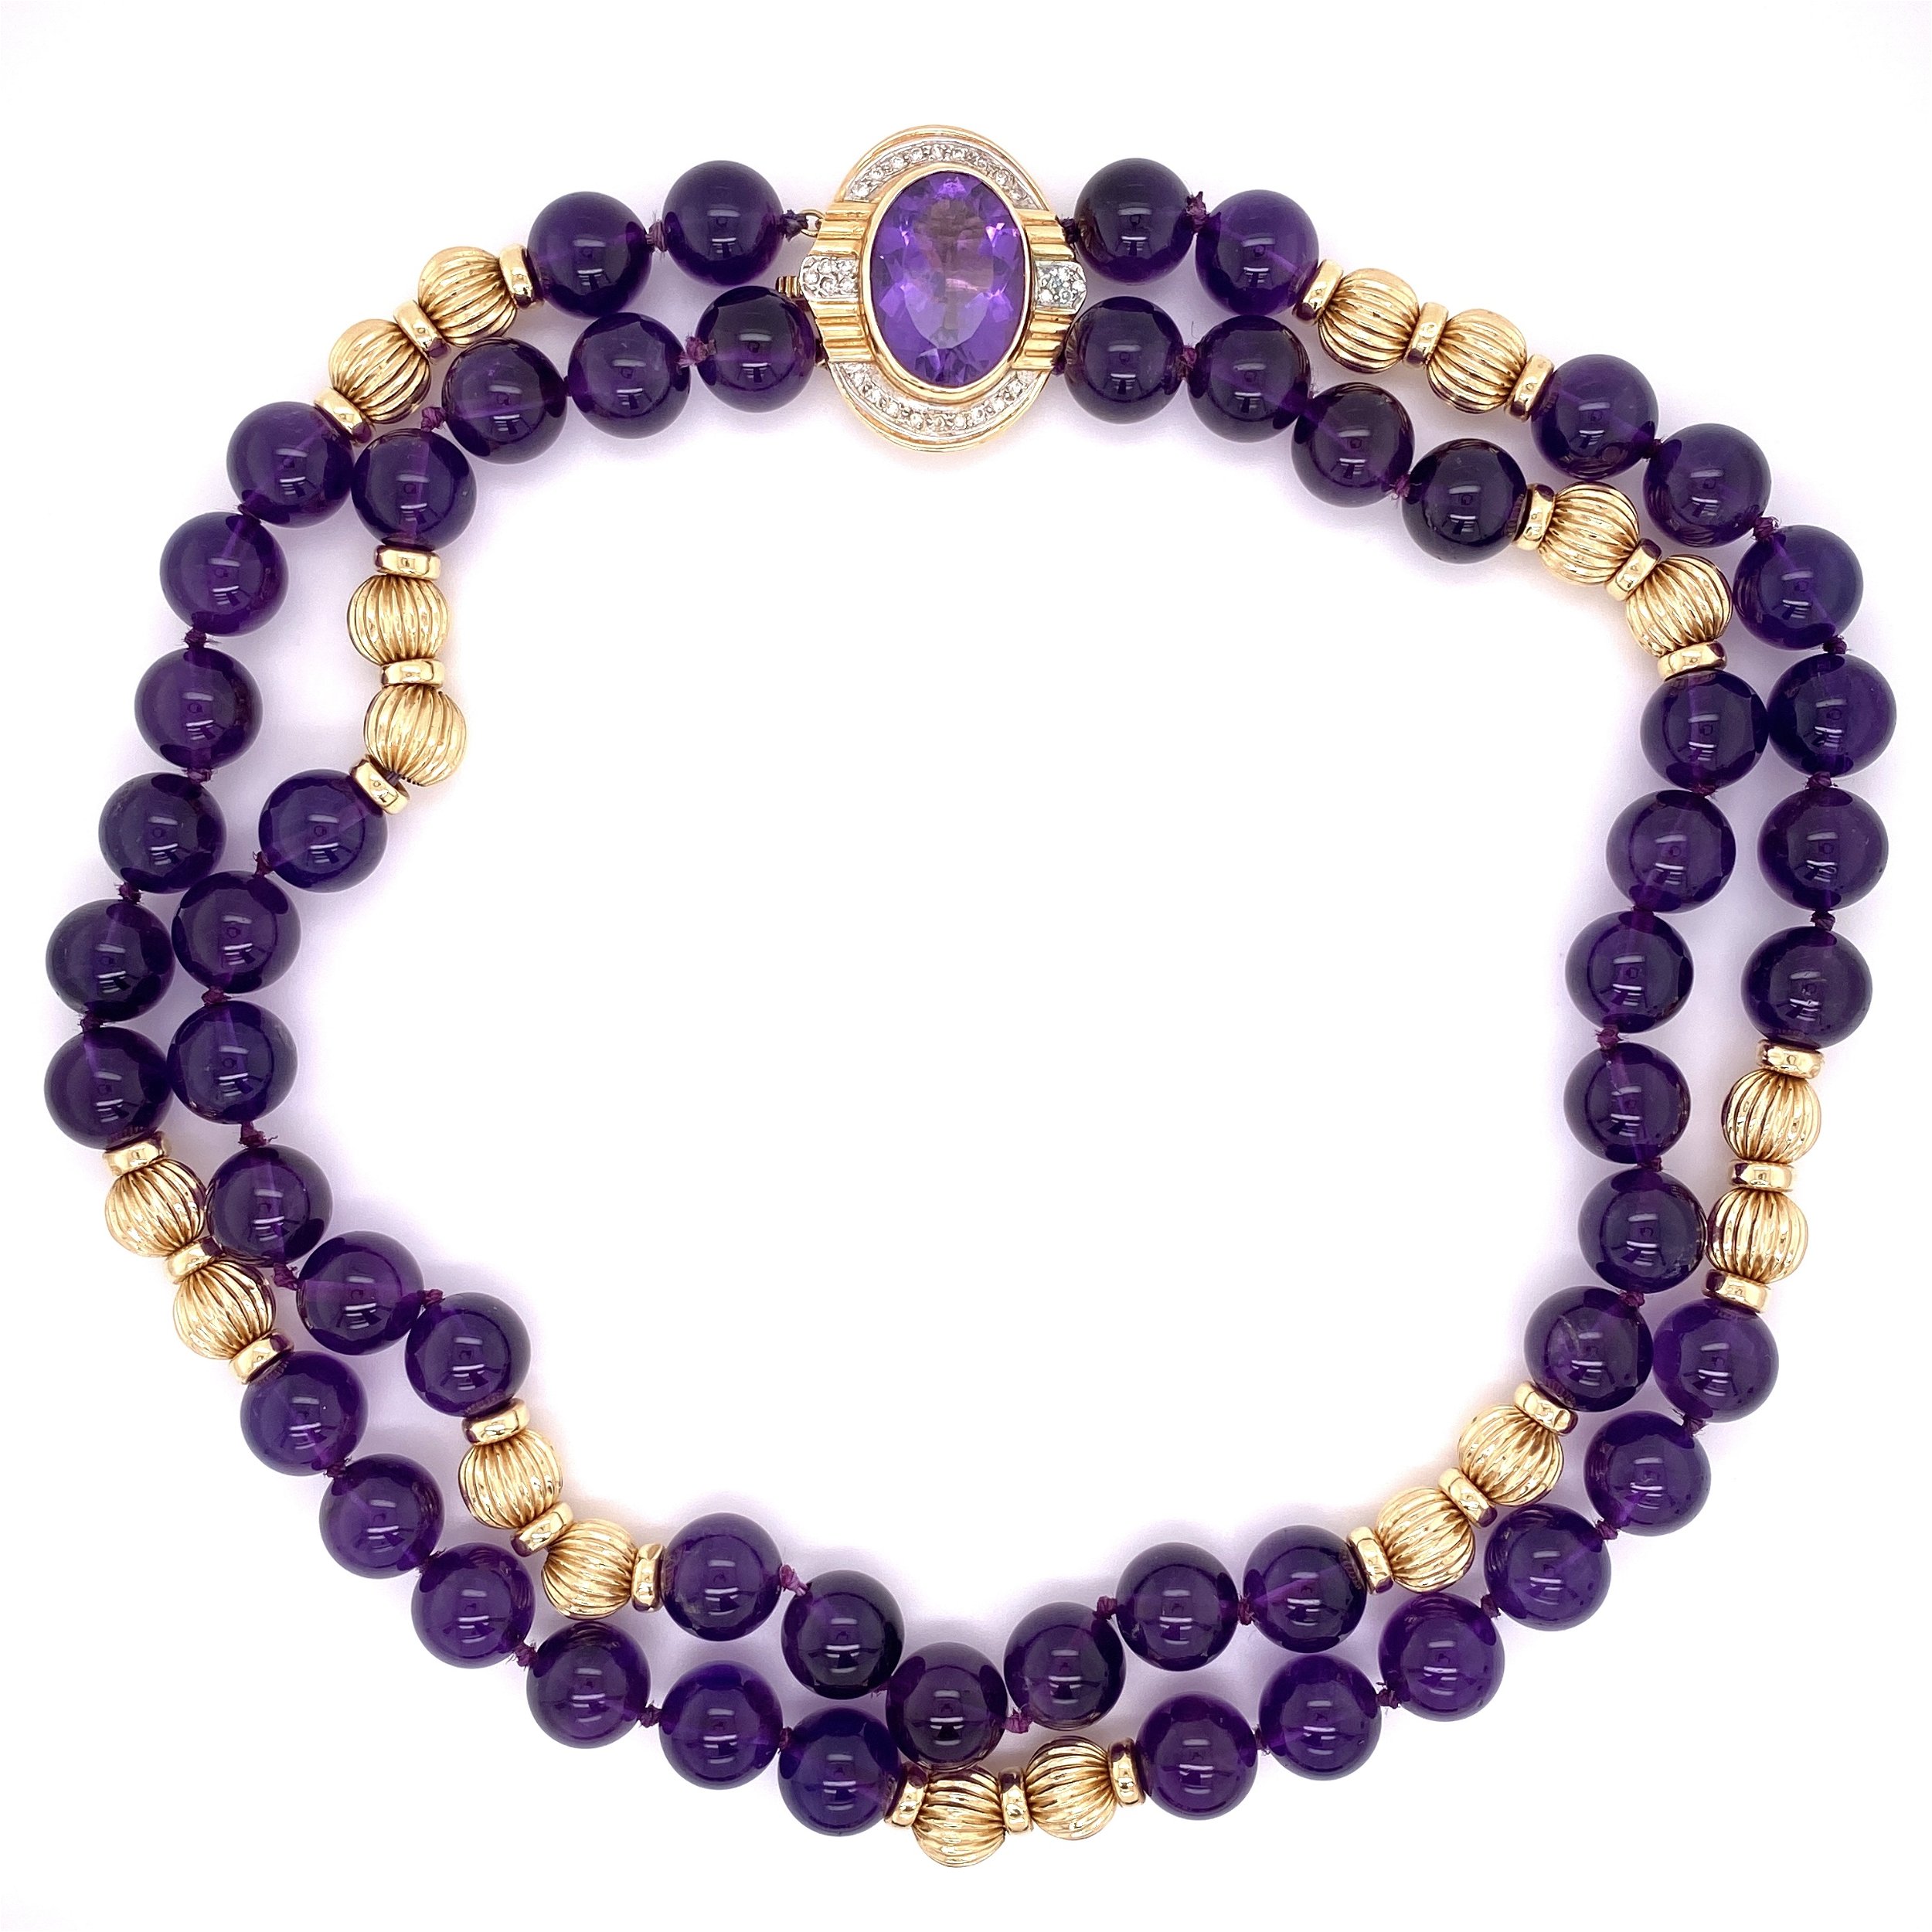 14K Yellow Gold 10mm Amethyst Bead Necklace with .25tcw Diamond Clasp 88.0g, 15"